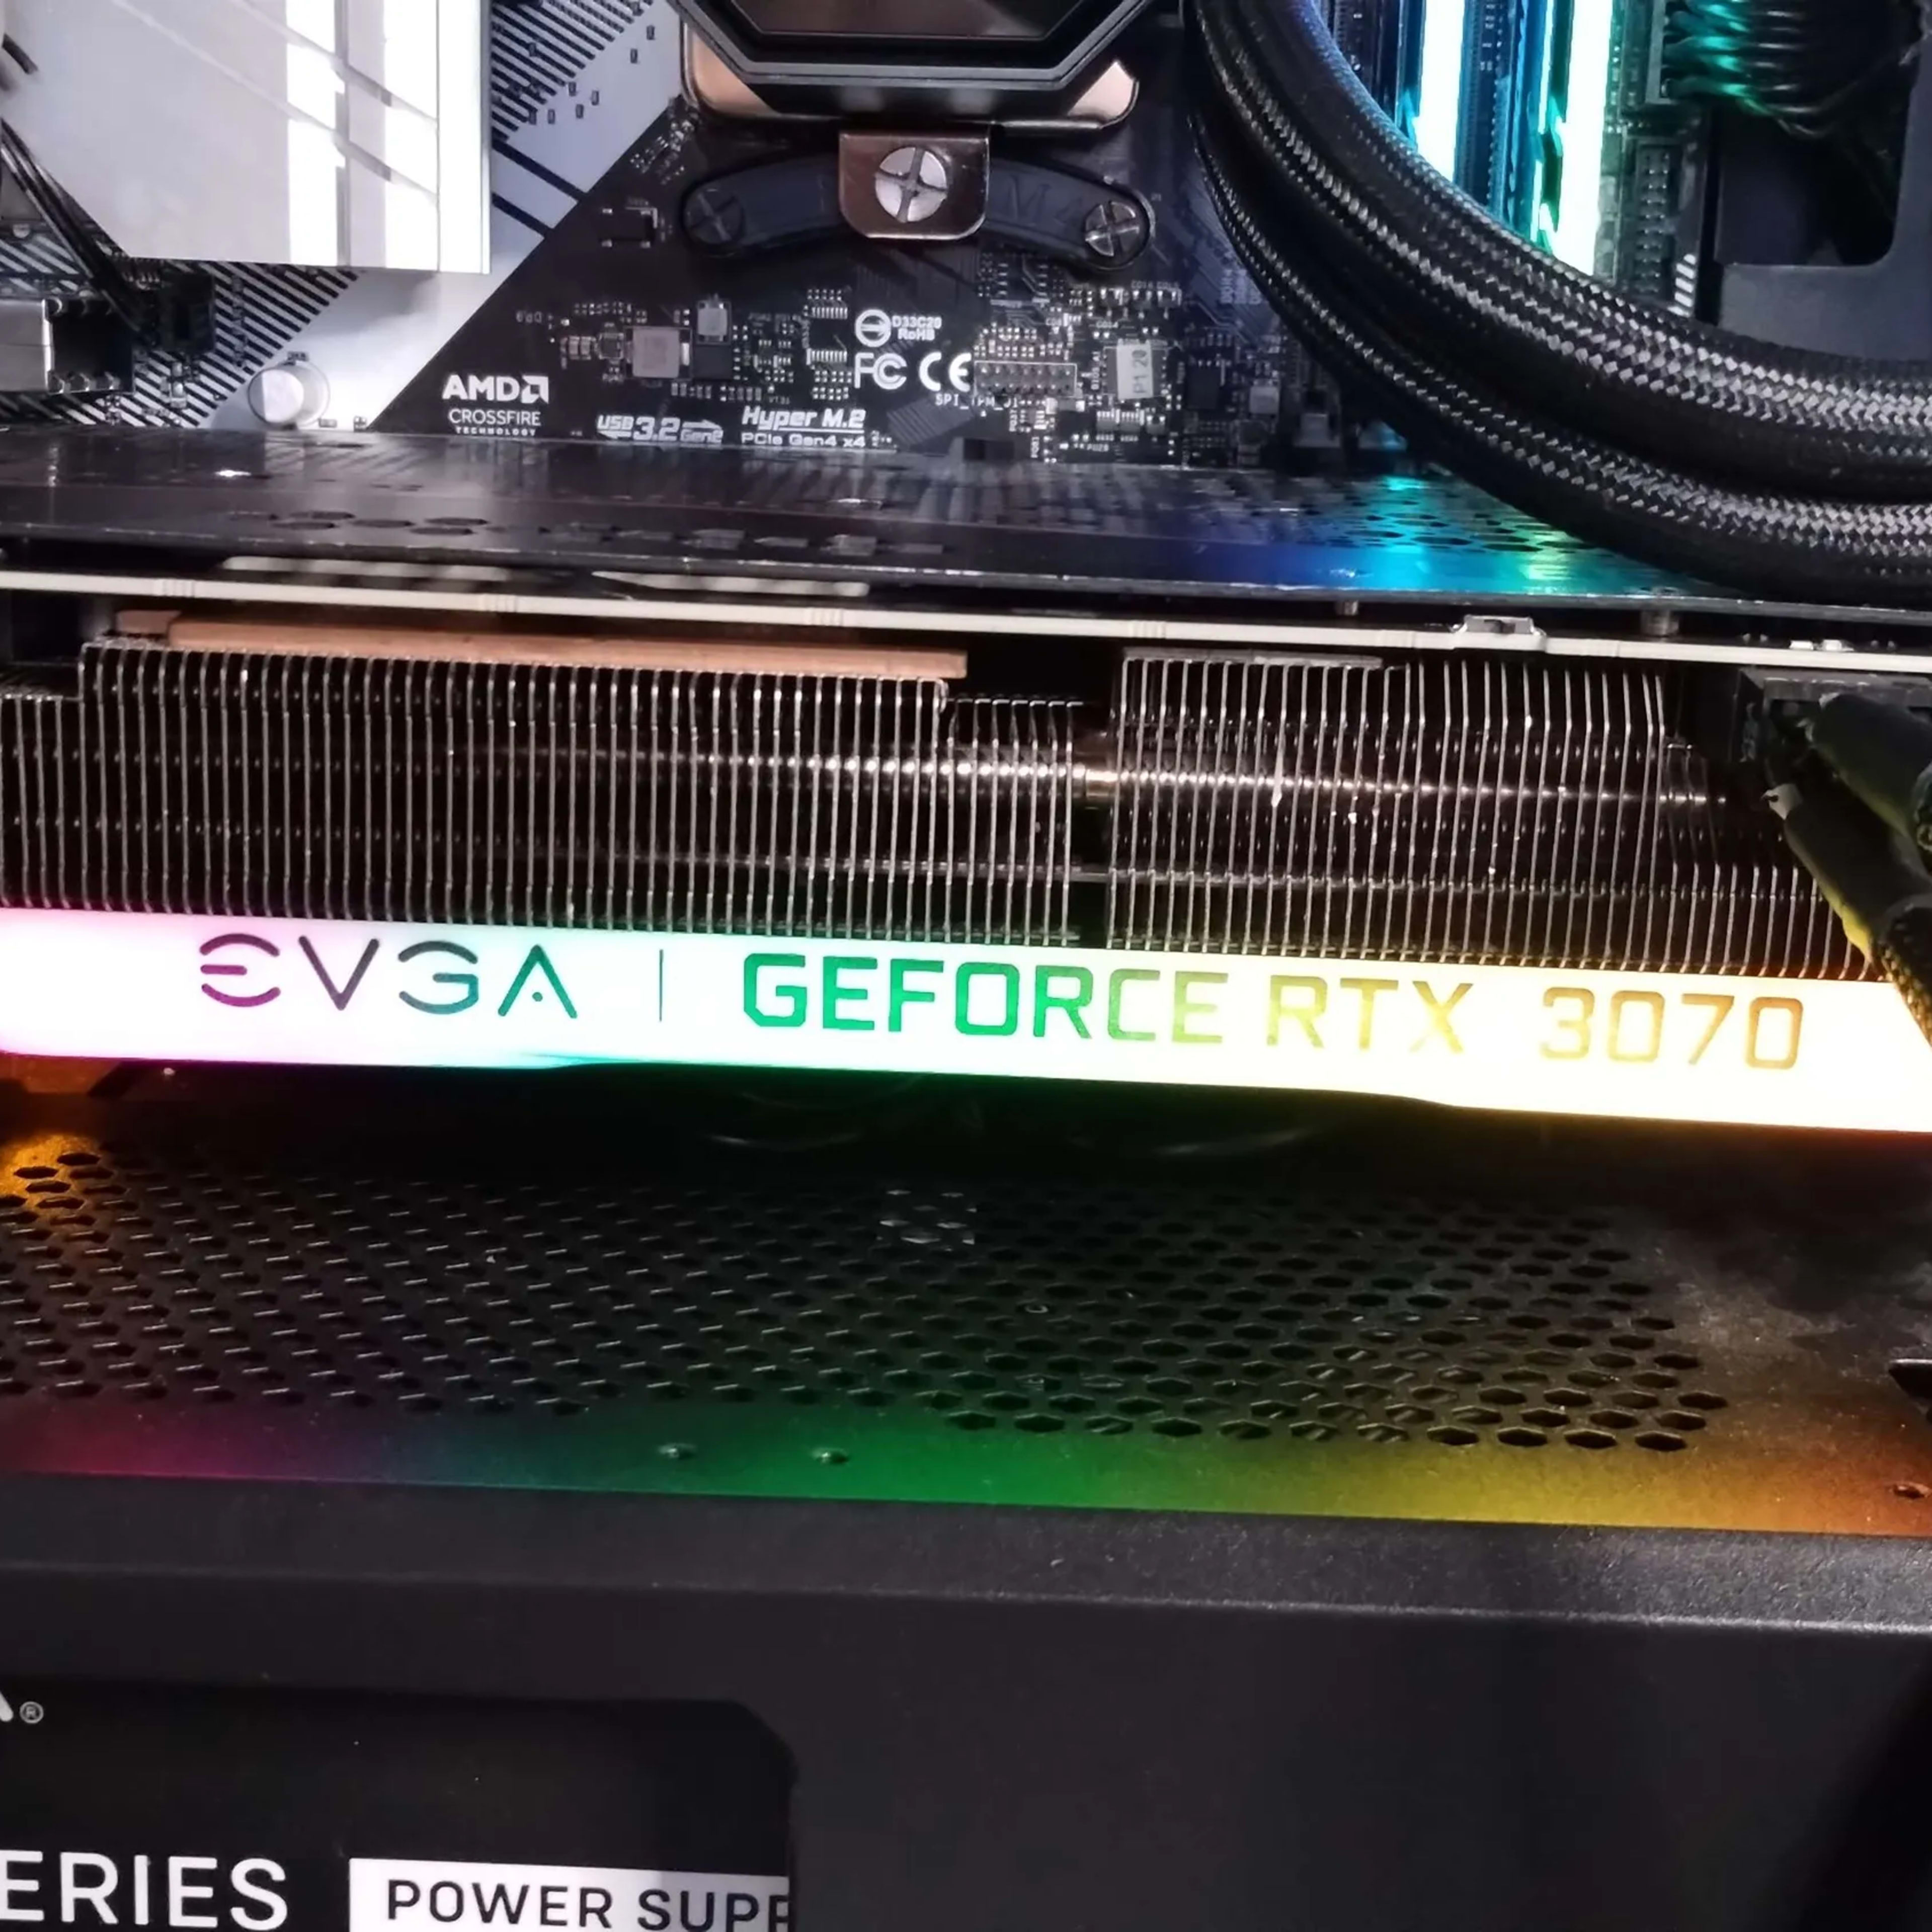 Artifacting GeForce RTX3070 with green lines